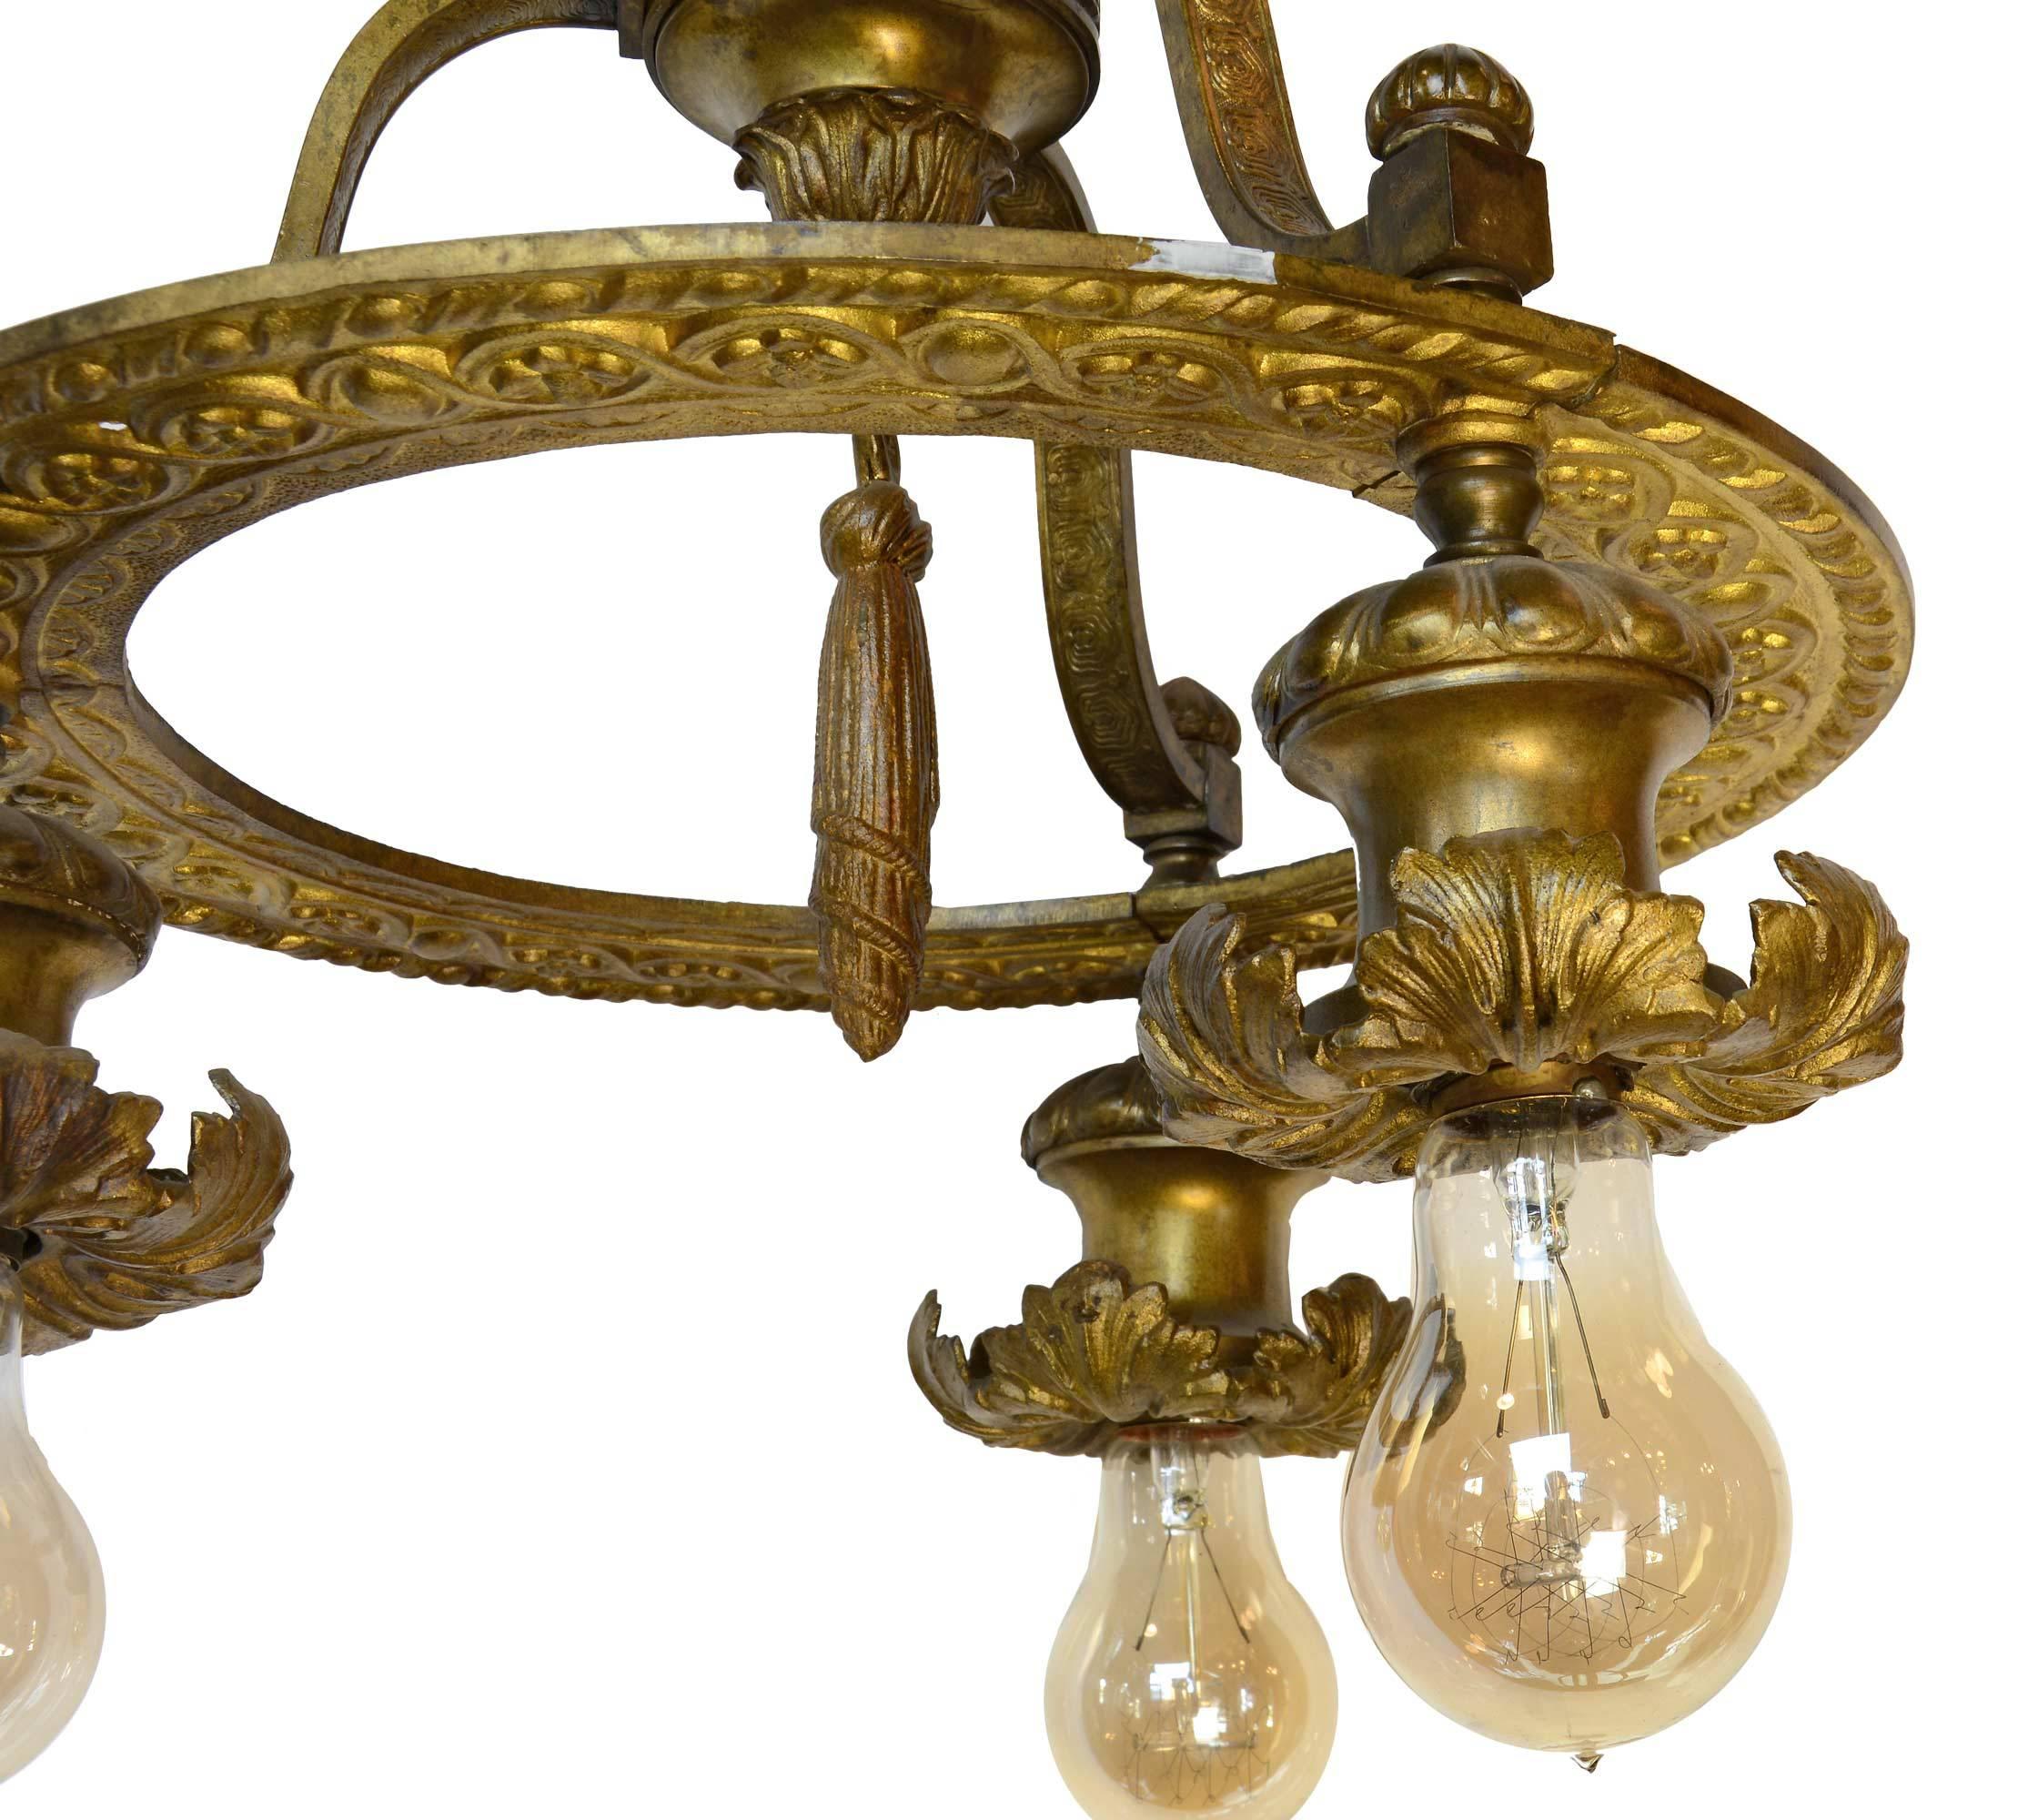 Early 20th Century Ornate Cast Brass Beaux Arts Fixture, circa 1915